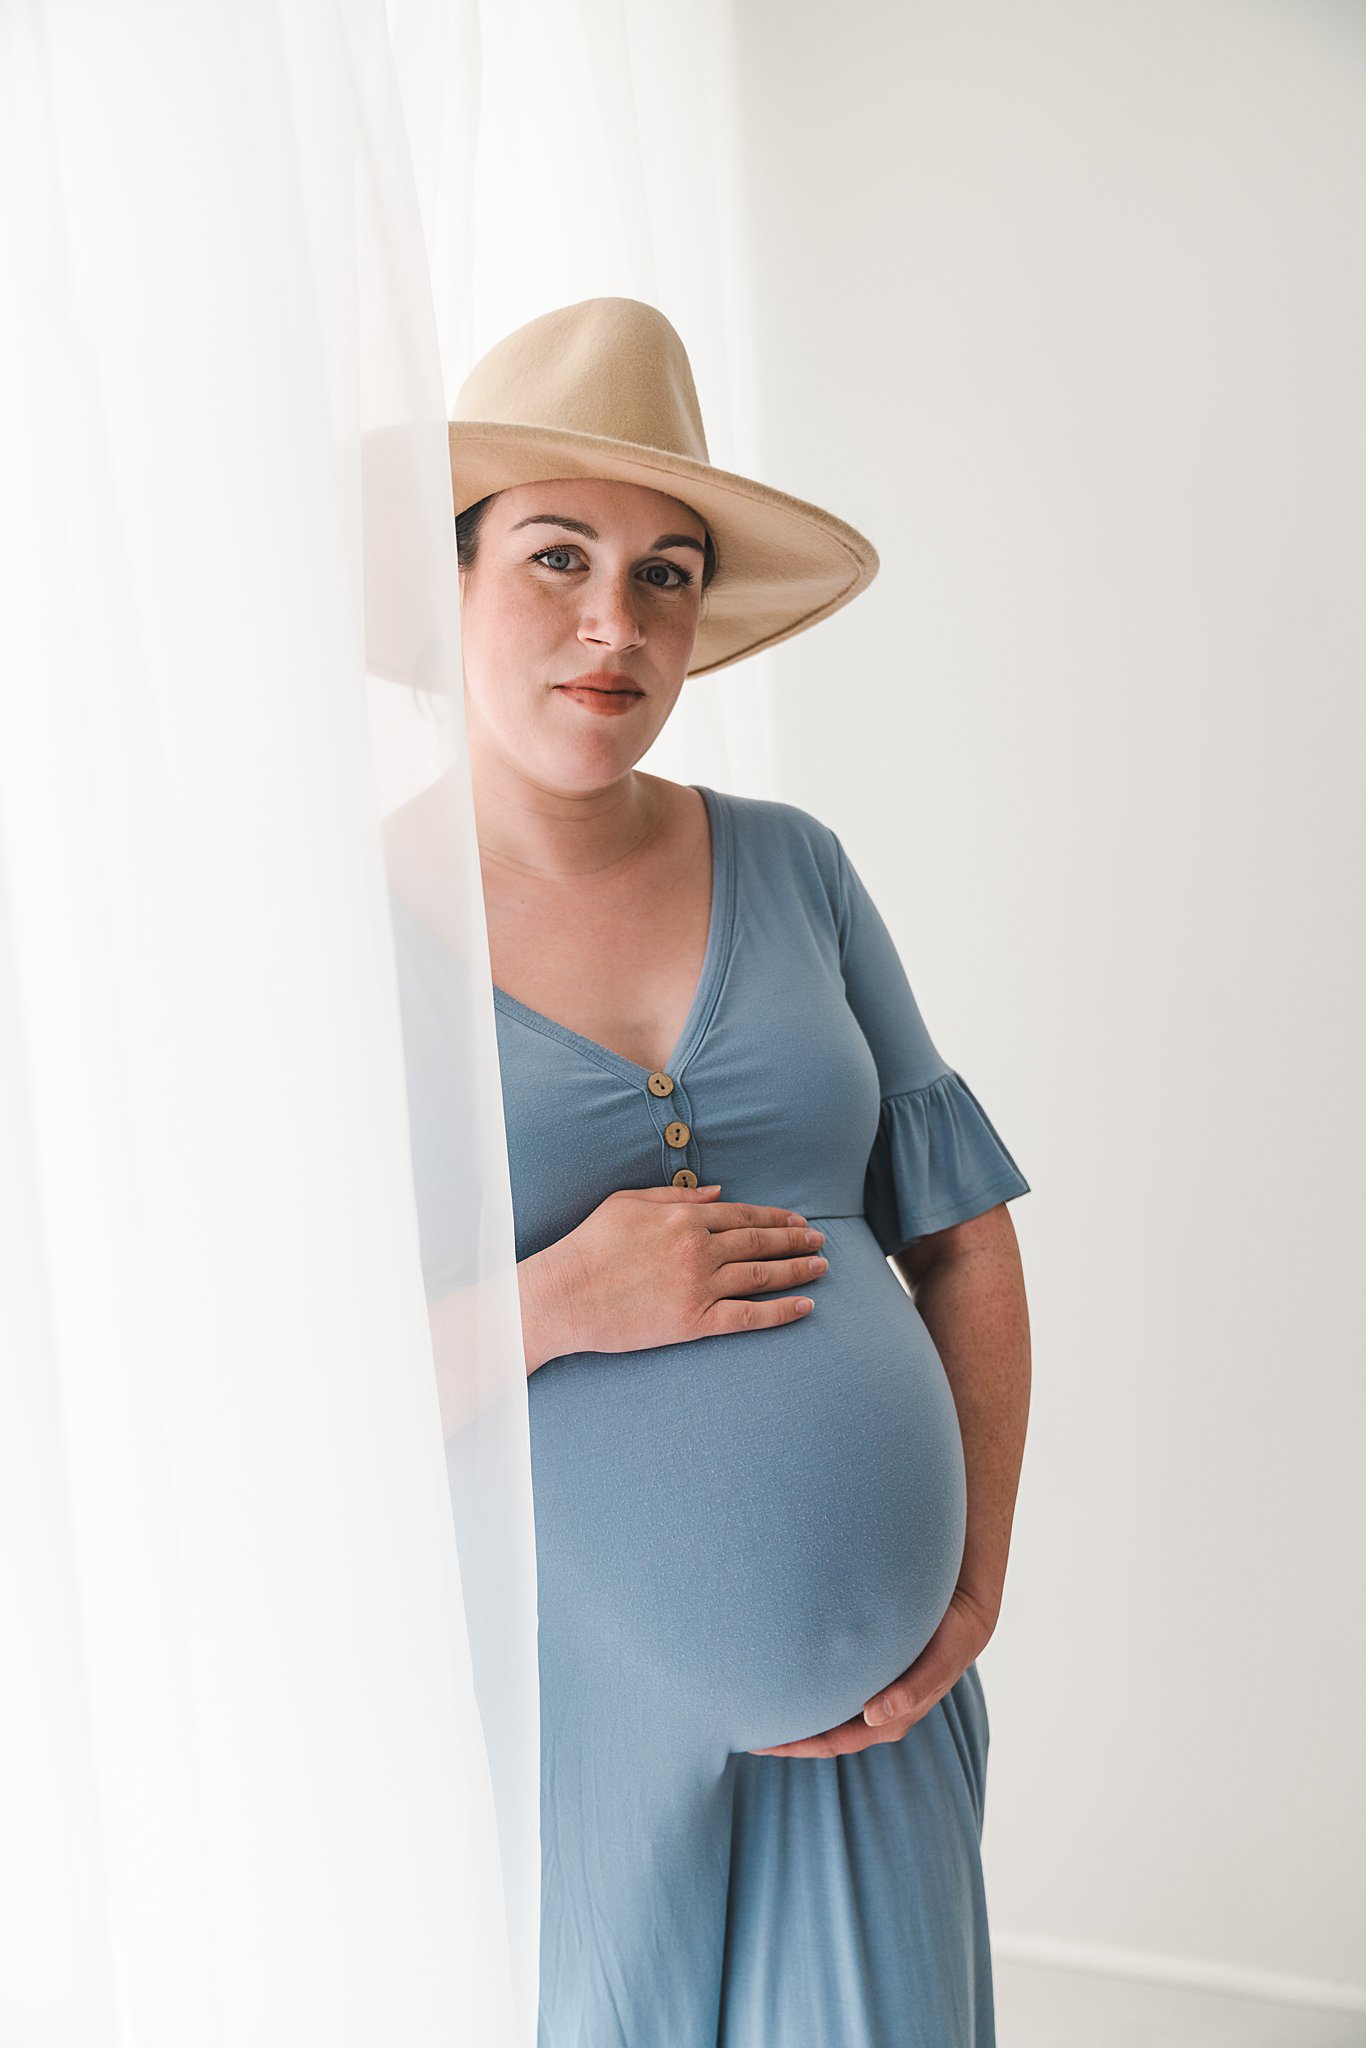 A mother to be in a blue maternity gown and tan hat stands in the white curtains of a window roots community birth center